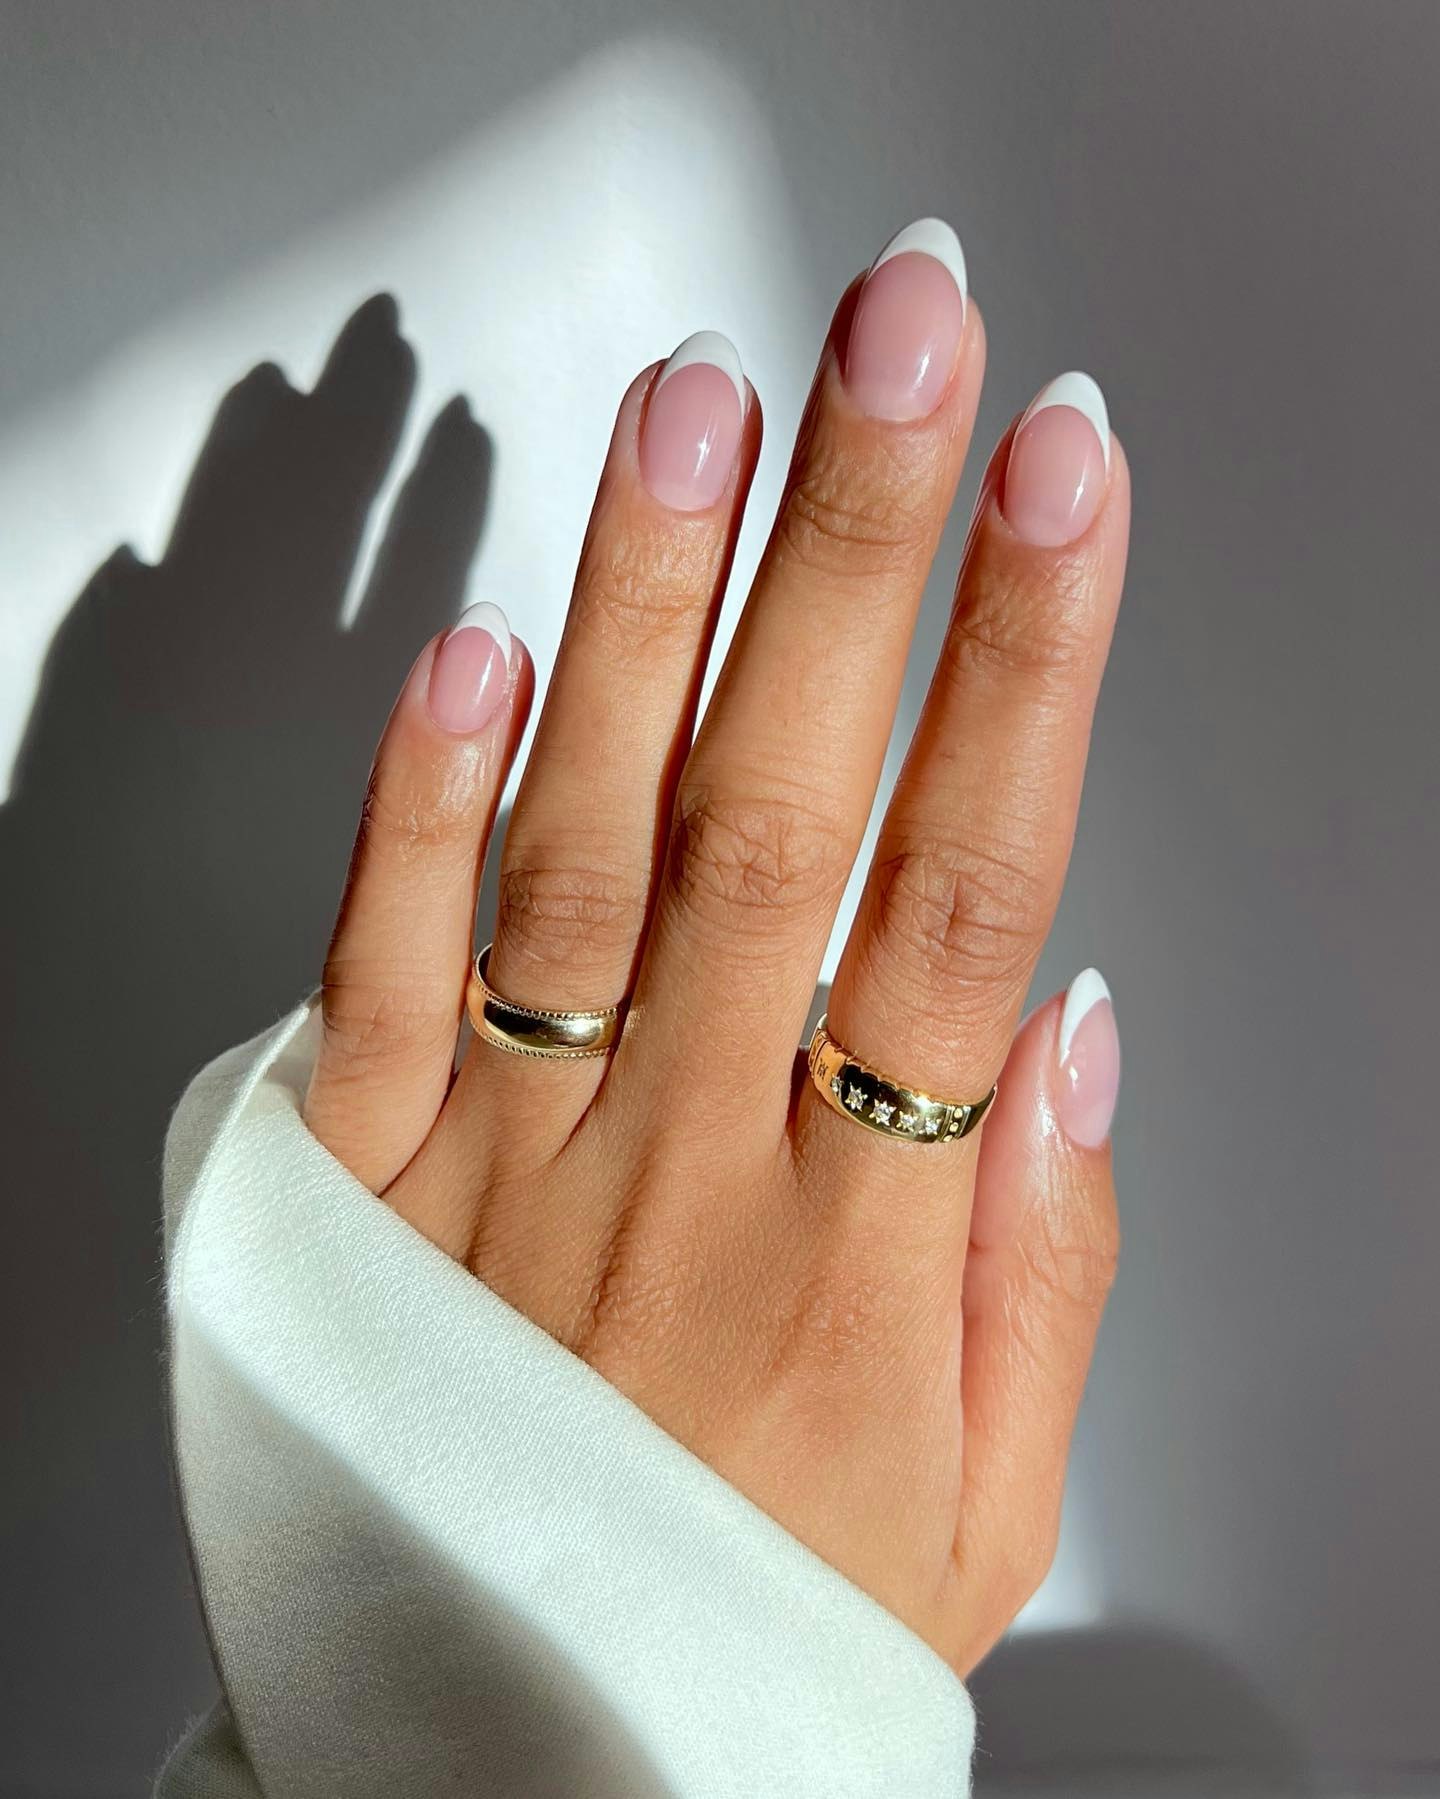 The Classic French Wedding Manicure